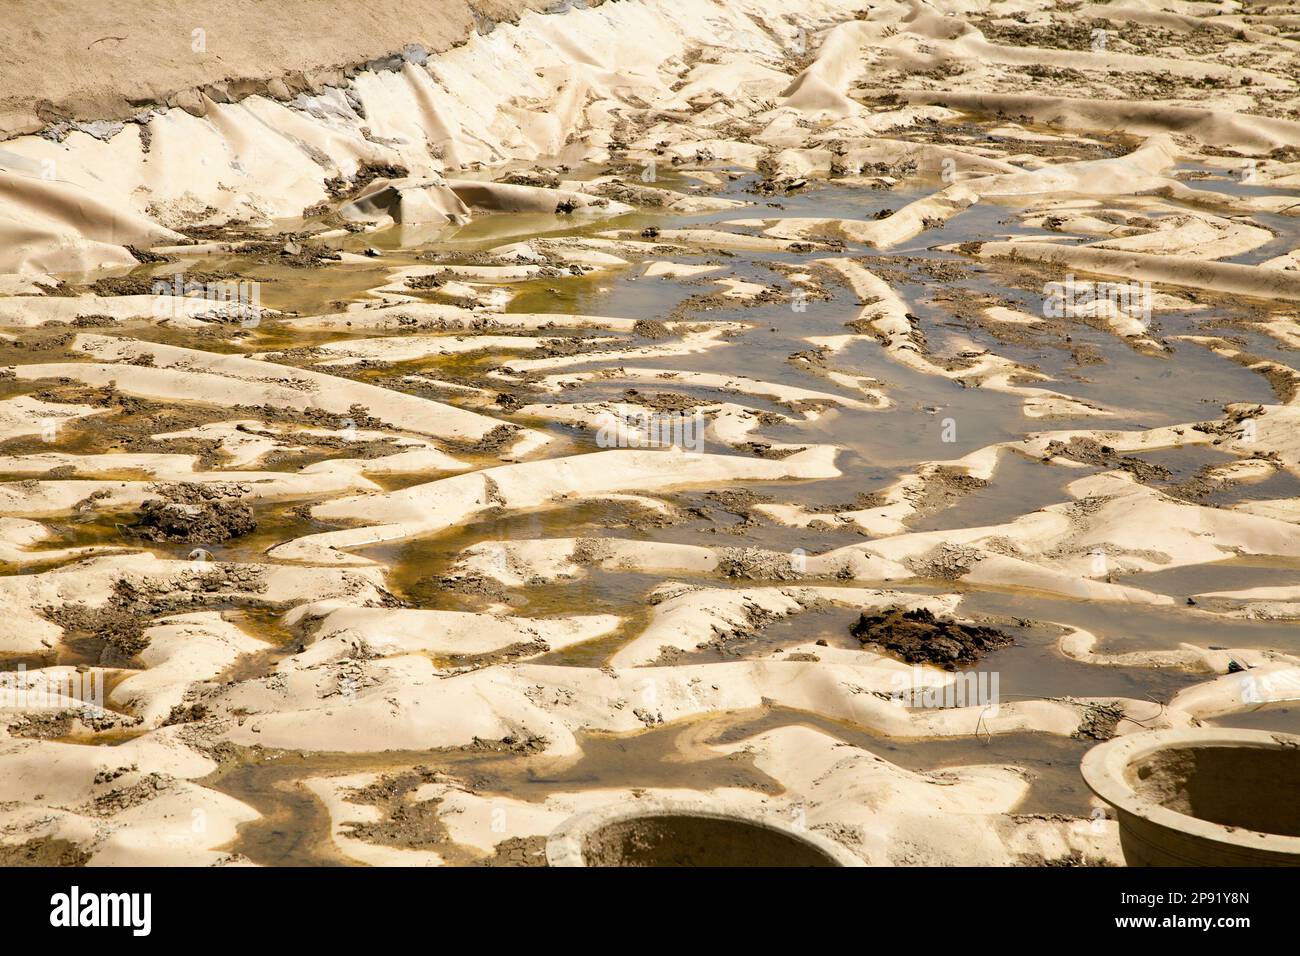 Dirty liner at a bottom of a drained pond. The process of building an artificial lake. Abstract dirty industrial background Stock Photo